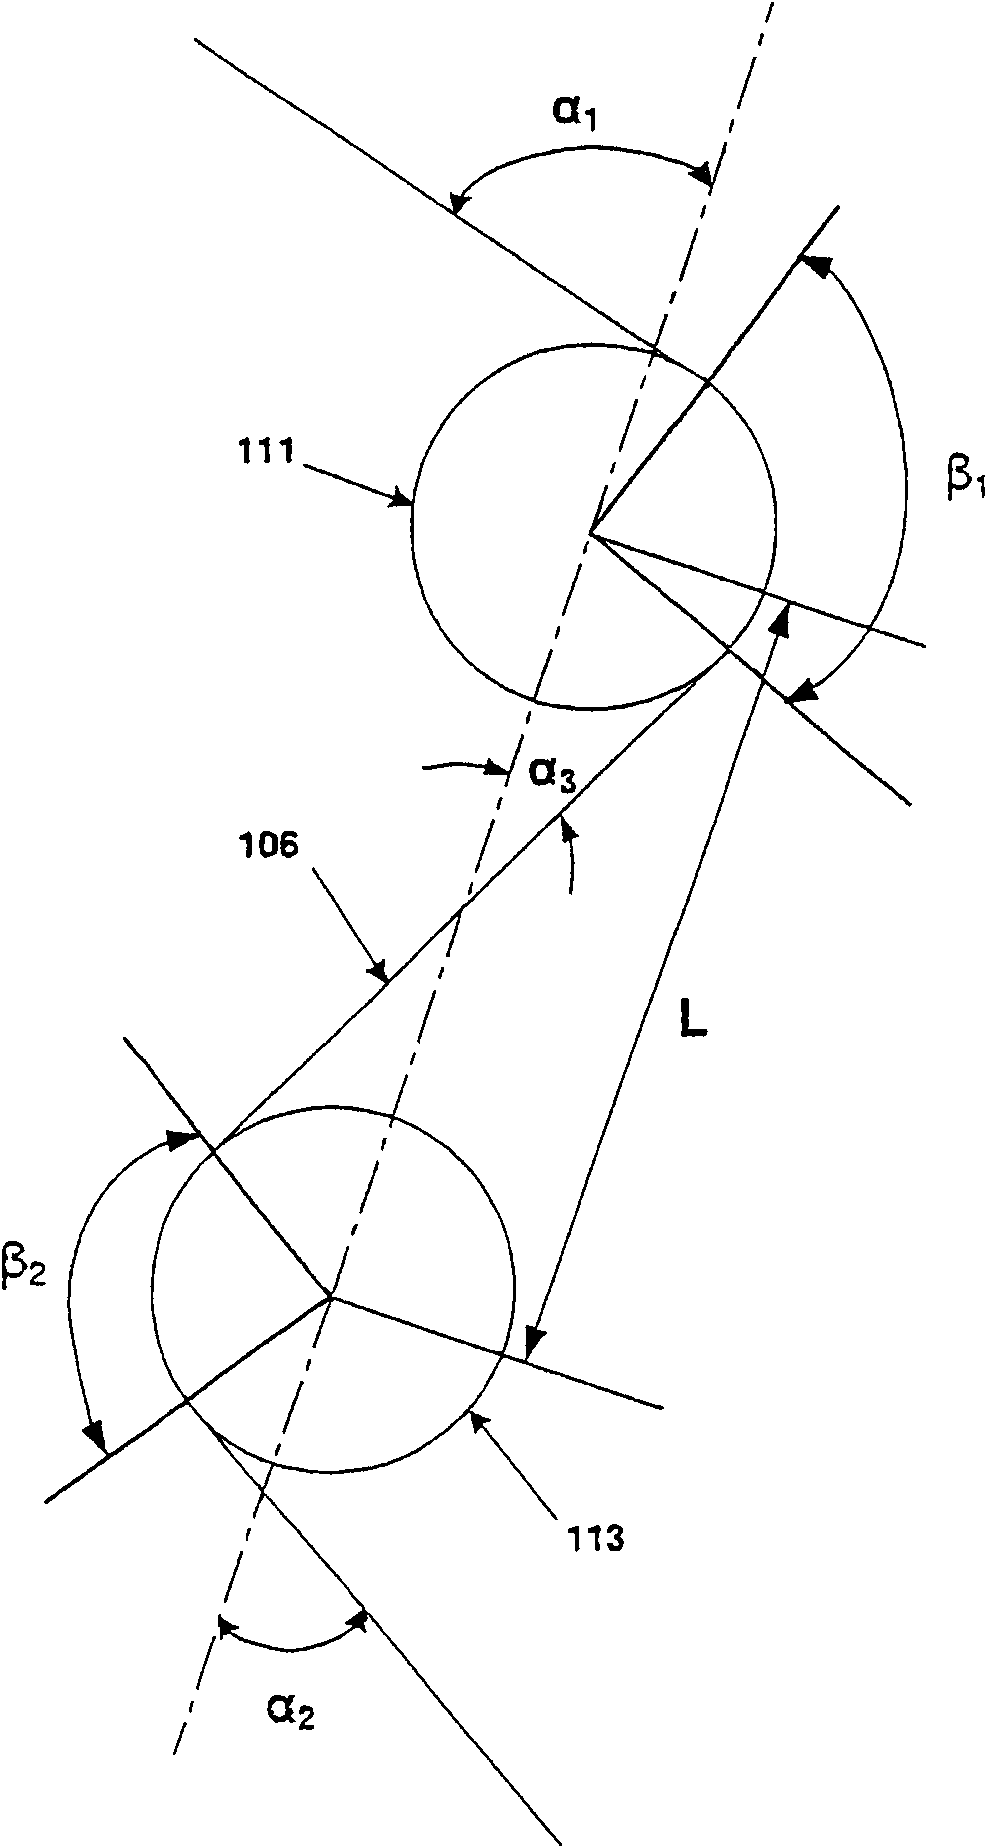 Method and apparatus for manufacturing slalom false twisting on ring yarn